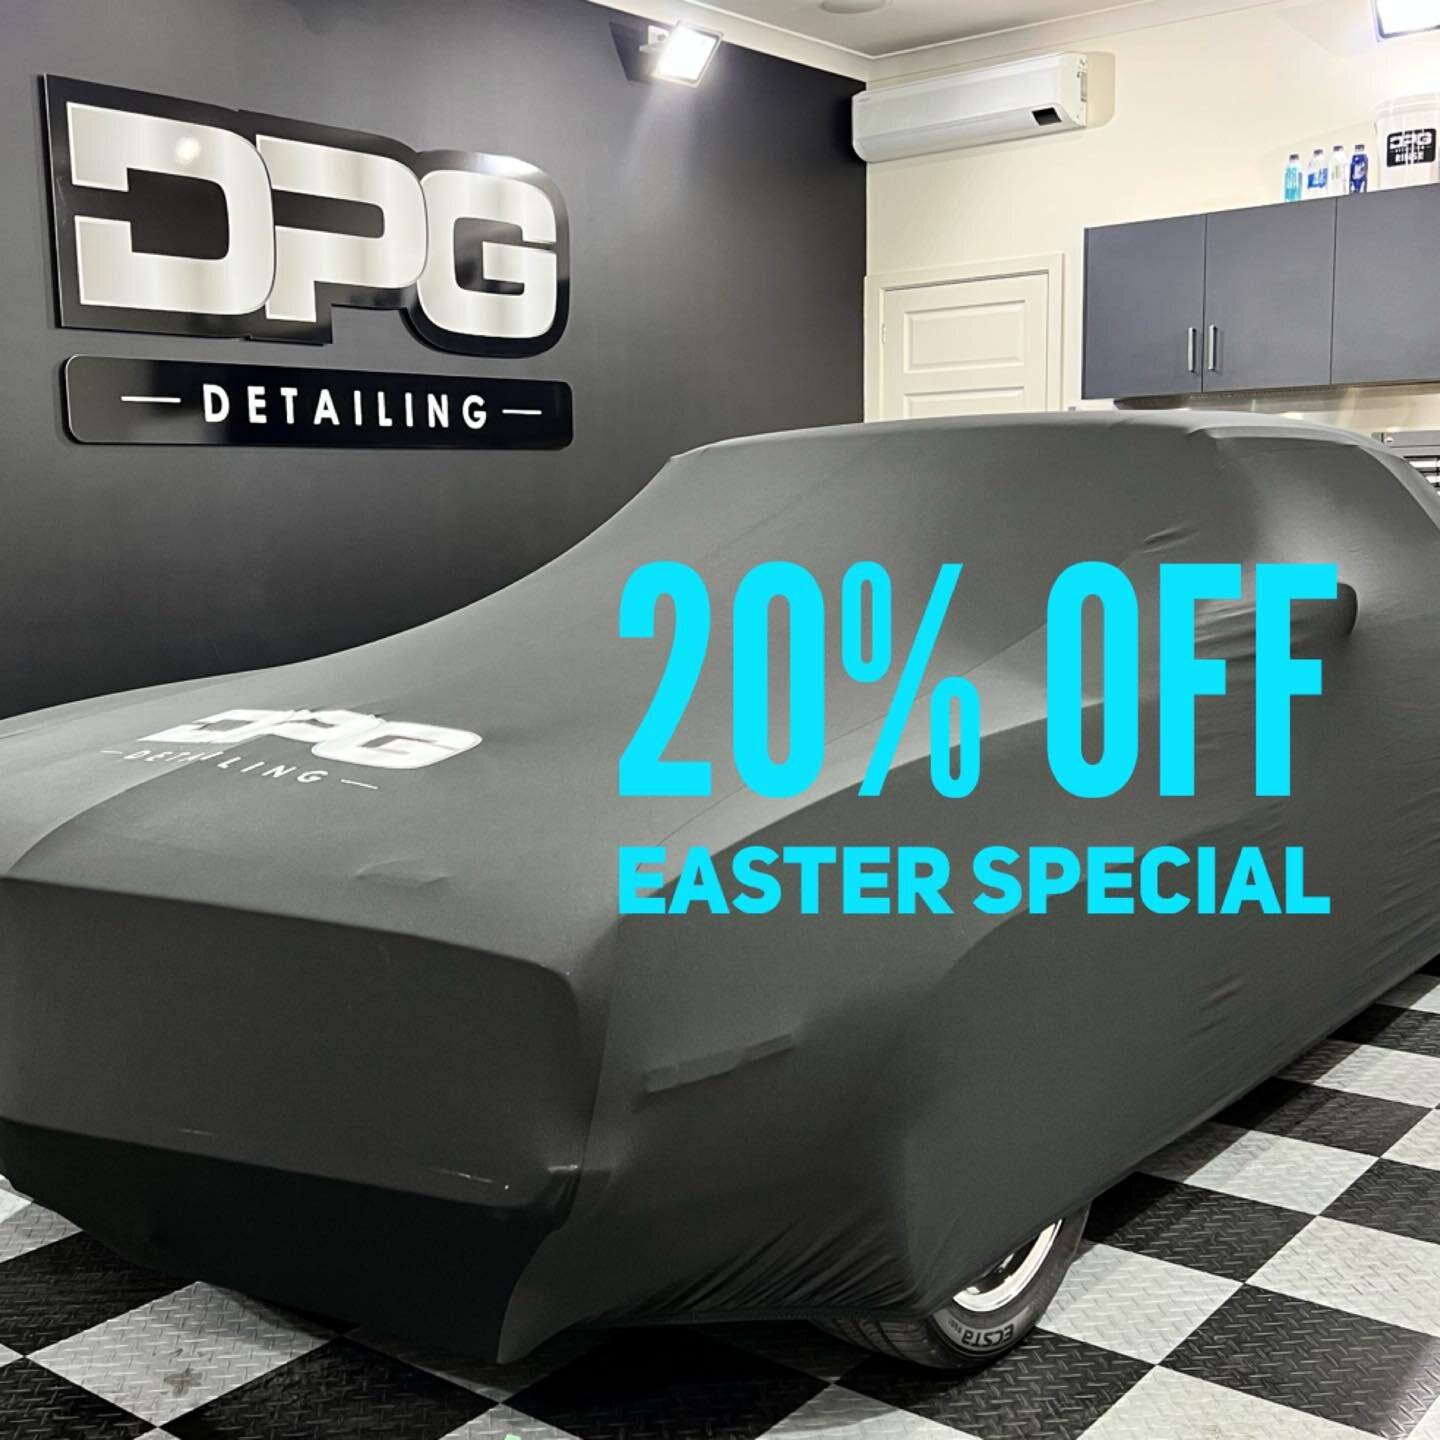 🐰🐰 COVER SHOP EASTER SPECIAL 🐰🐰

Are you after a premium Car or Motorcycle Cover?

As a reseller for The Cover Shop car covers. We are offering a 20% Easter Special discount from now until Monday 10th April midnight. 

We have a range of Car/Moto